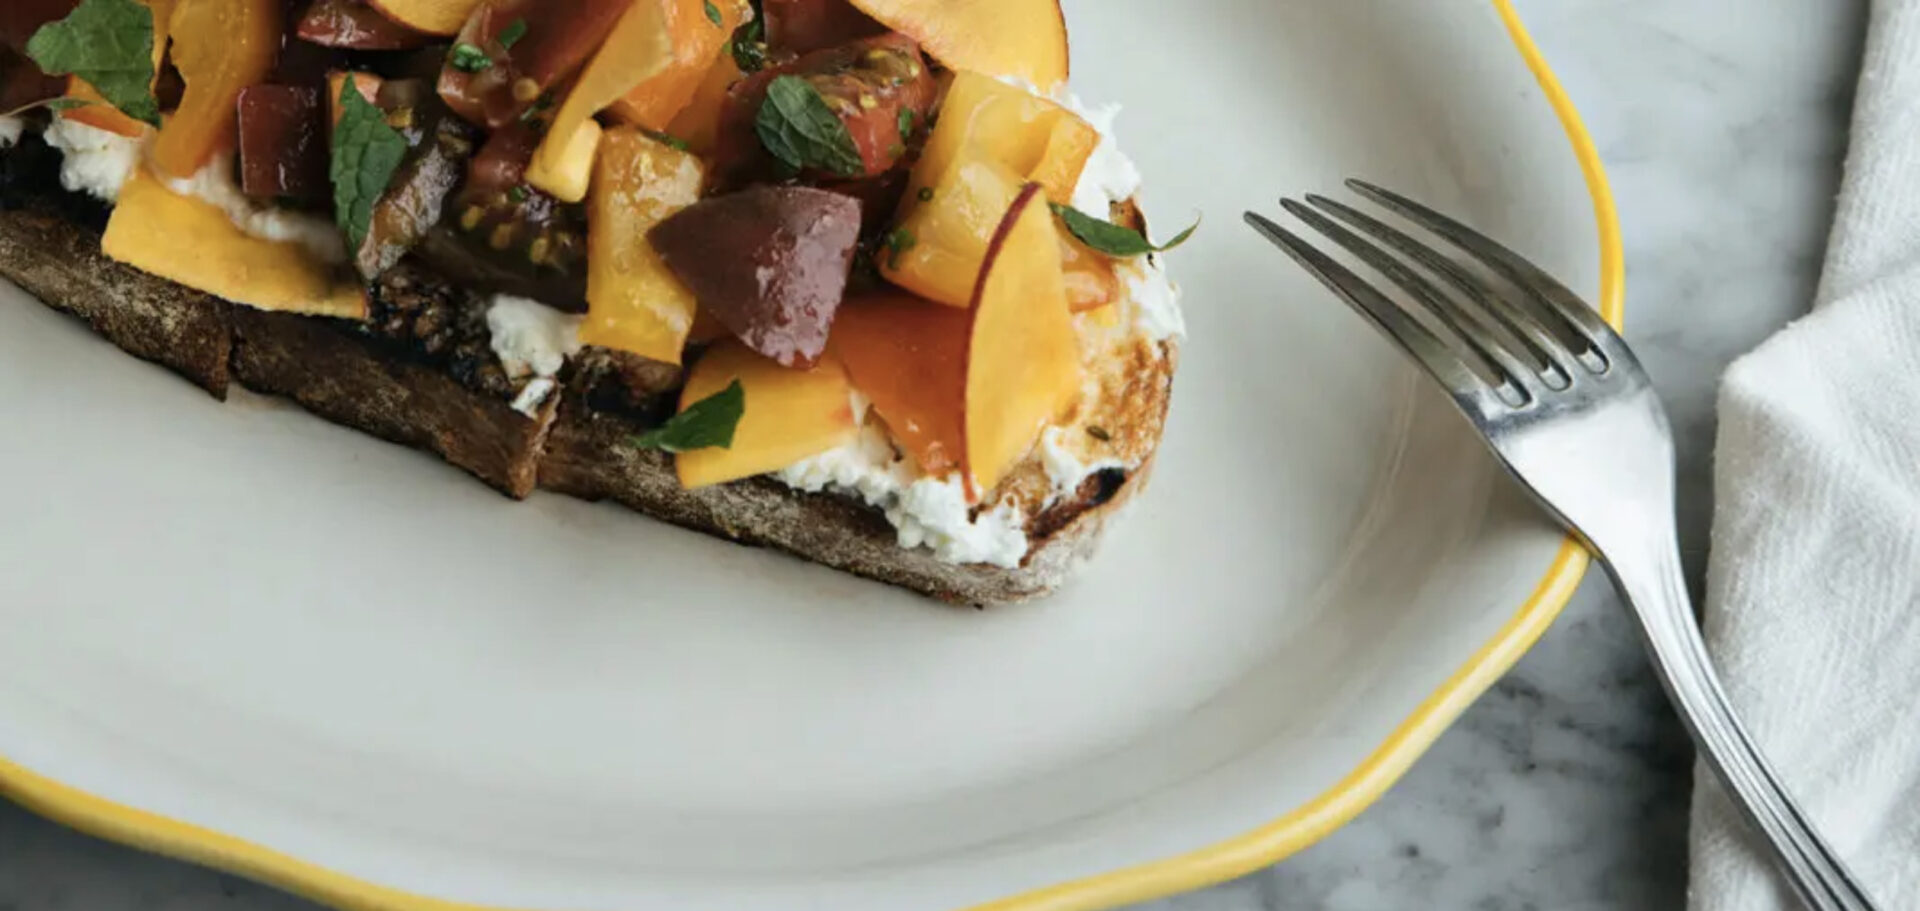 peach and tomato on toast with a fork next to it